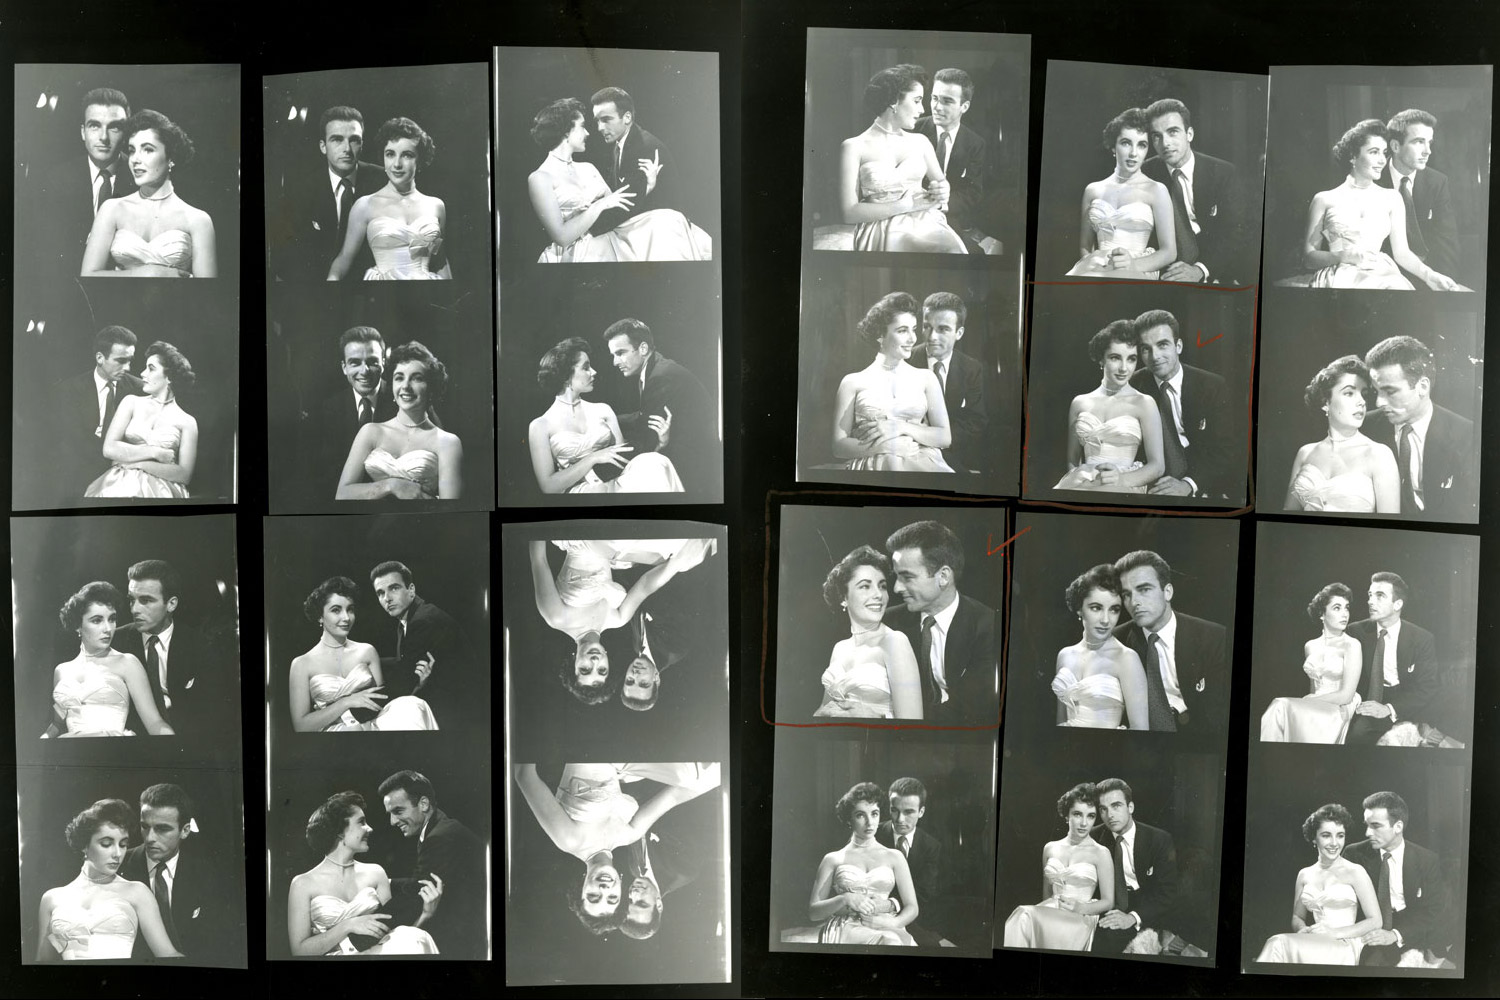 Contact sheet from LIFE photographer Peter Stackpole's shoot on a Paramount lot with Elizabeth Taylor and Montgomery Clift in 1950.